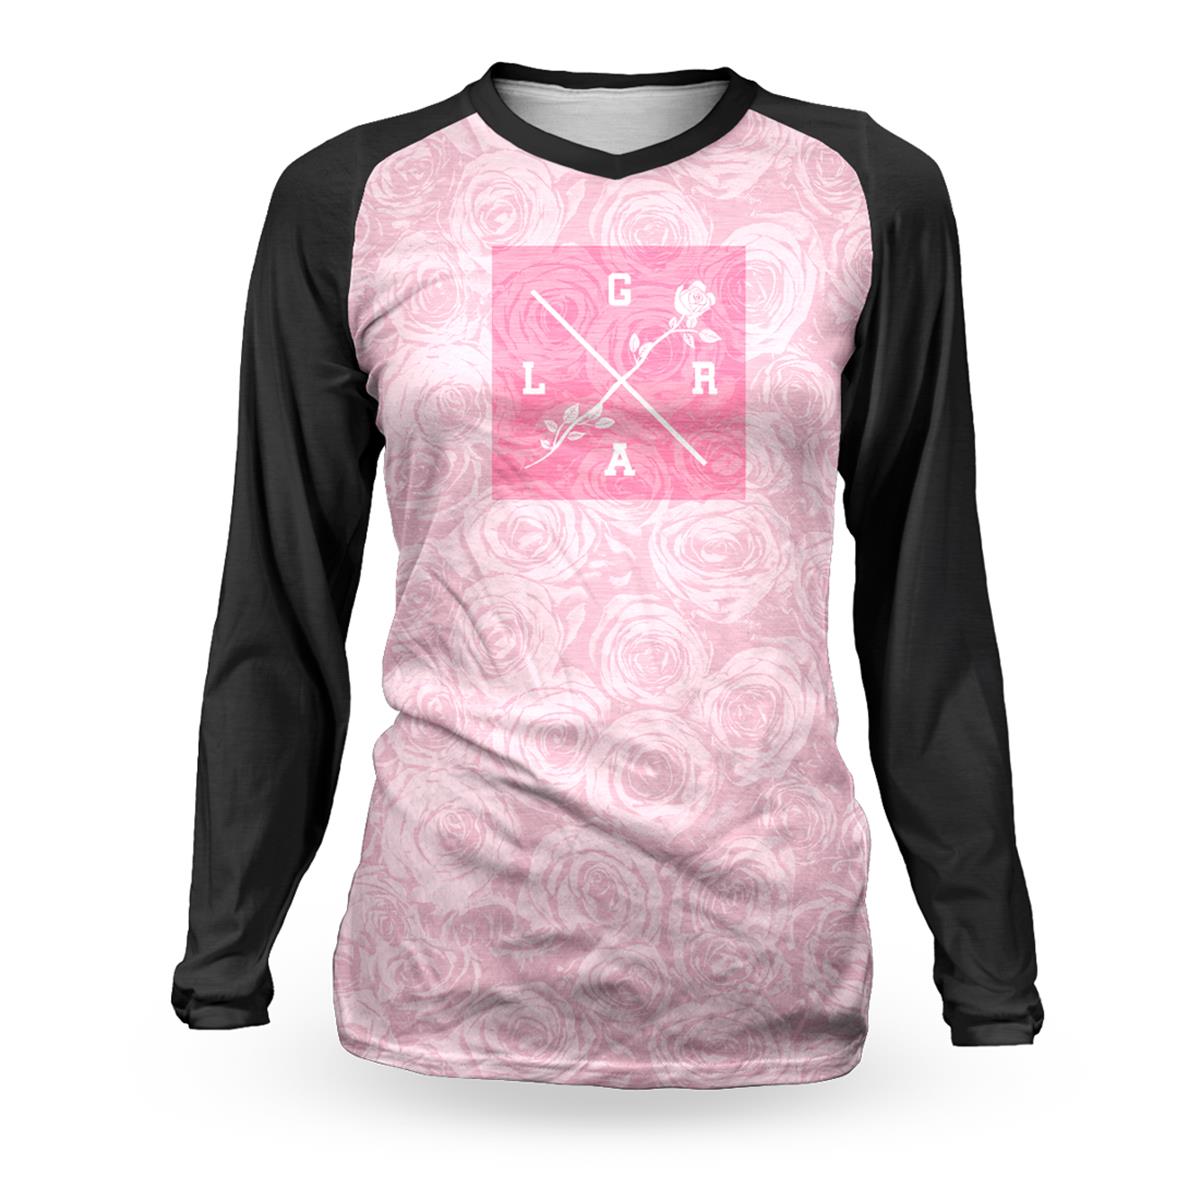 Loose Riders Girls Bike Jersey Cult of Shred Rose